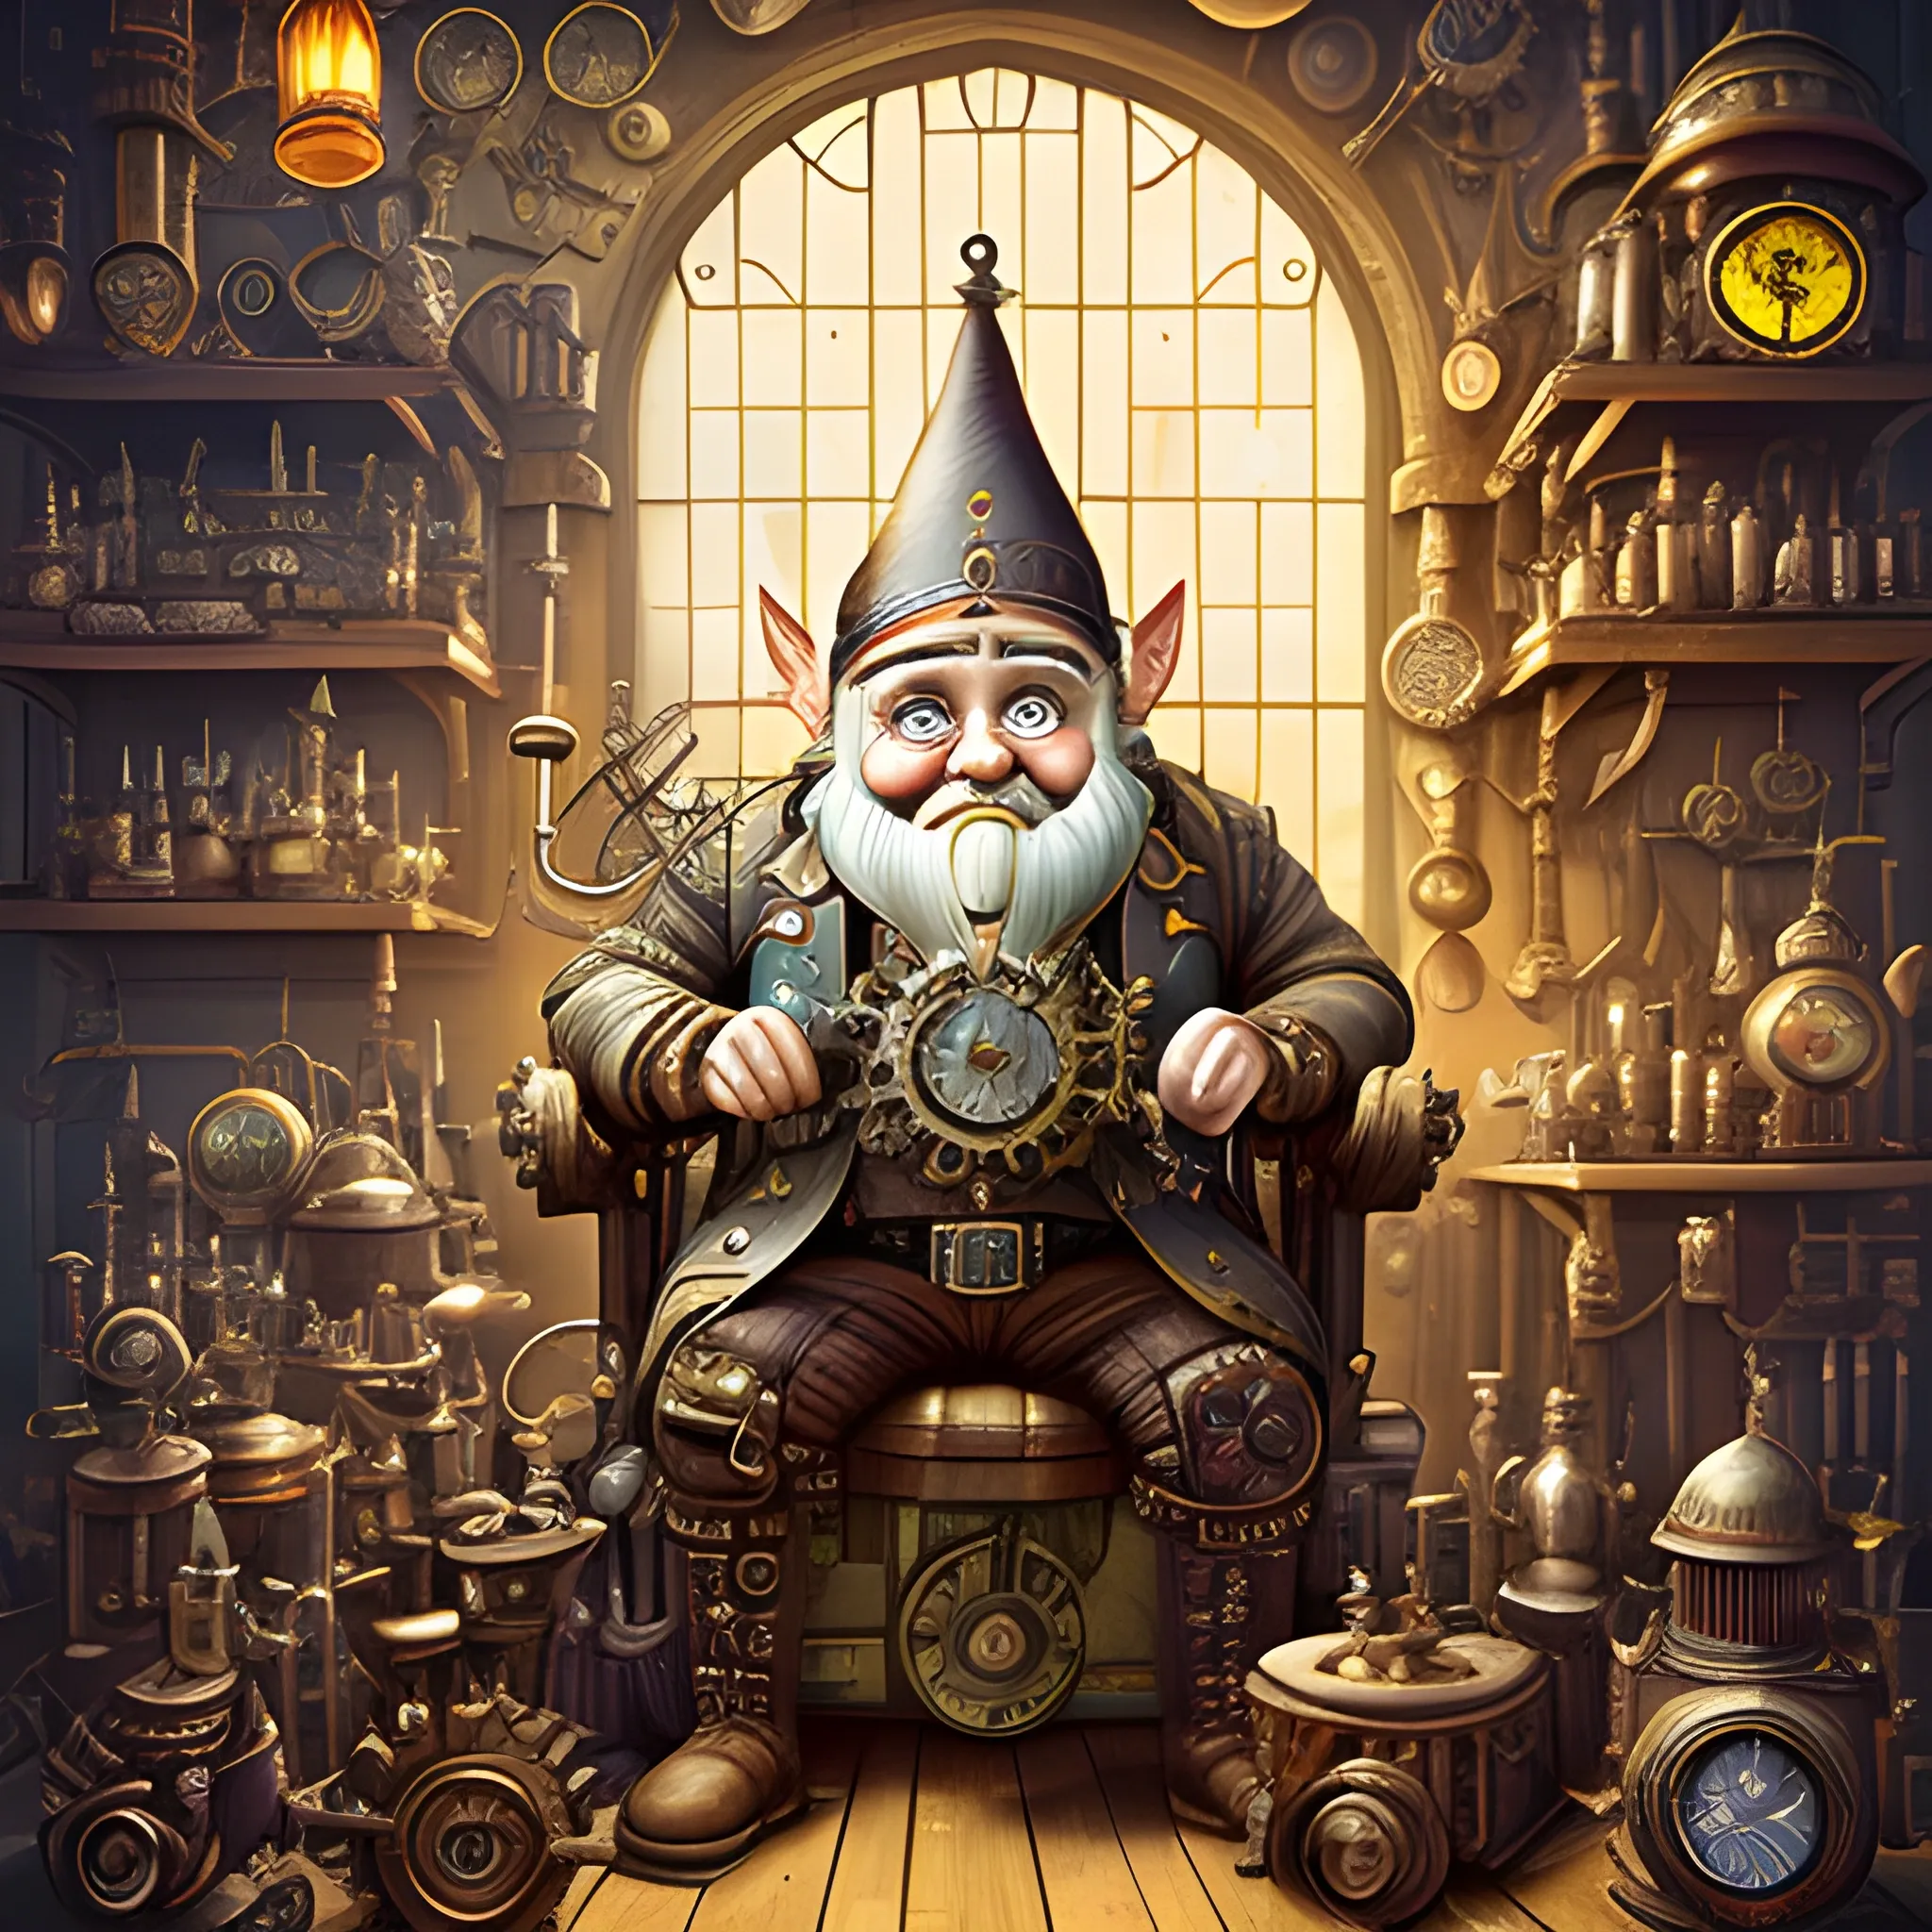 A steampunk-inspired digital illustration of a gnome inventor in a cluttered workshop, surrounded by intricate machinery and gears. The camera angle is a medium shot, capturing the gnome's enthusiastic expression as he tinkers with a fantastical contraption. The lighting is warm and atmospheric, with rays of sunlight streaming through stained glass windows, casting vibrant colors and ((shadows)) across the room. The style combines elements of steampunk and clock-punk, resembling the works of Jules Verne and H.R. Giger. The image is detailed and intricate, showcasing the gnome's ingenious inventions and the mesmerizing complexity of the steampunk world. It is a visually stunning artwork that captures the imagination., 3D